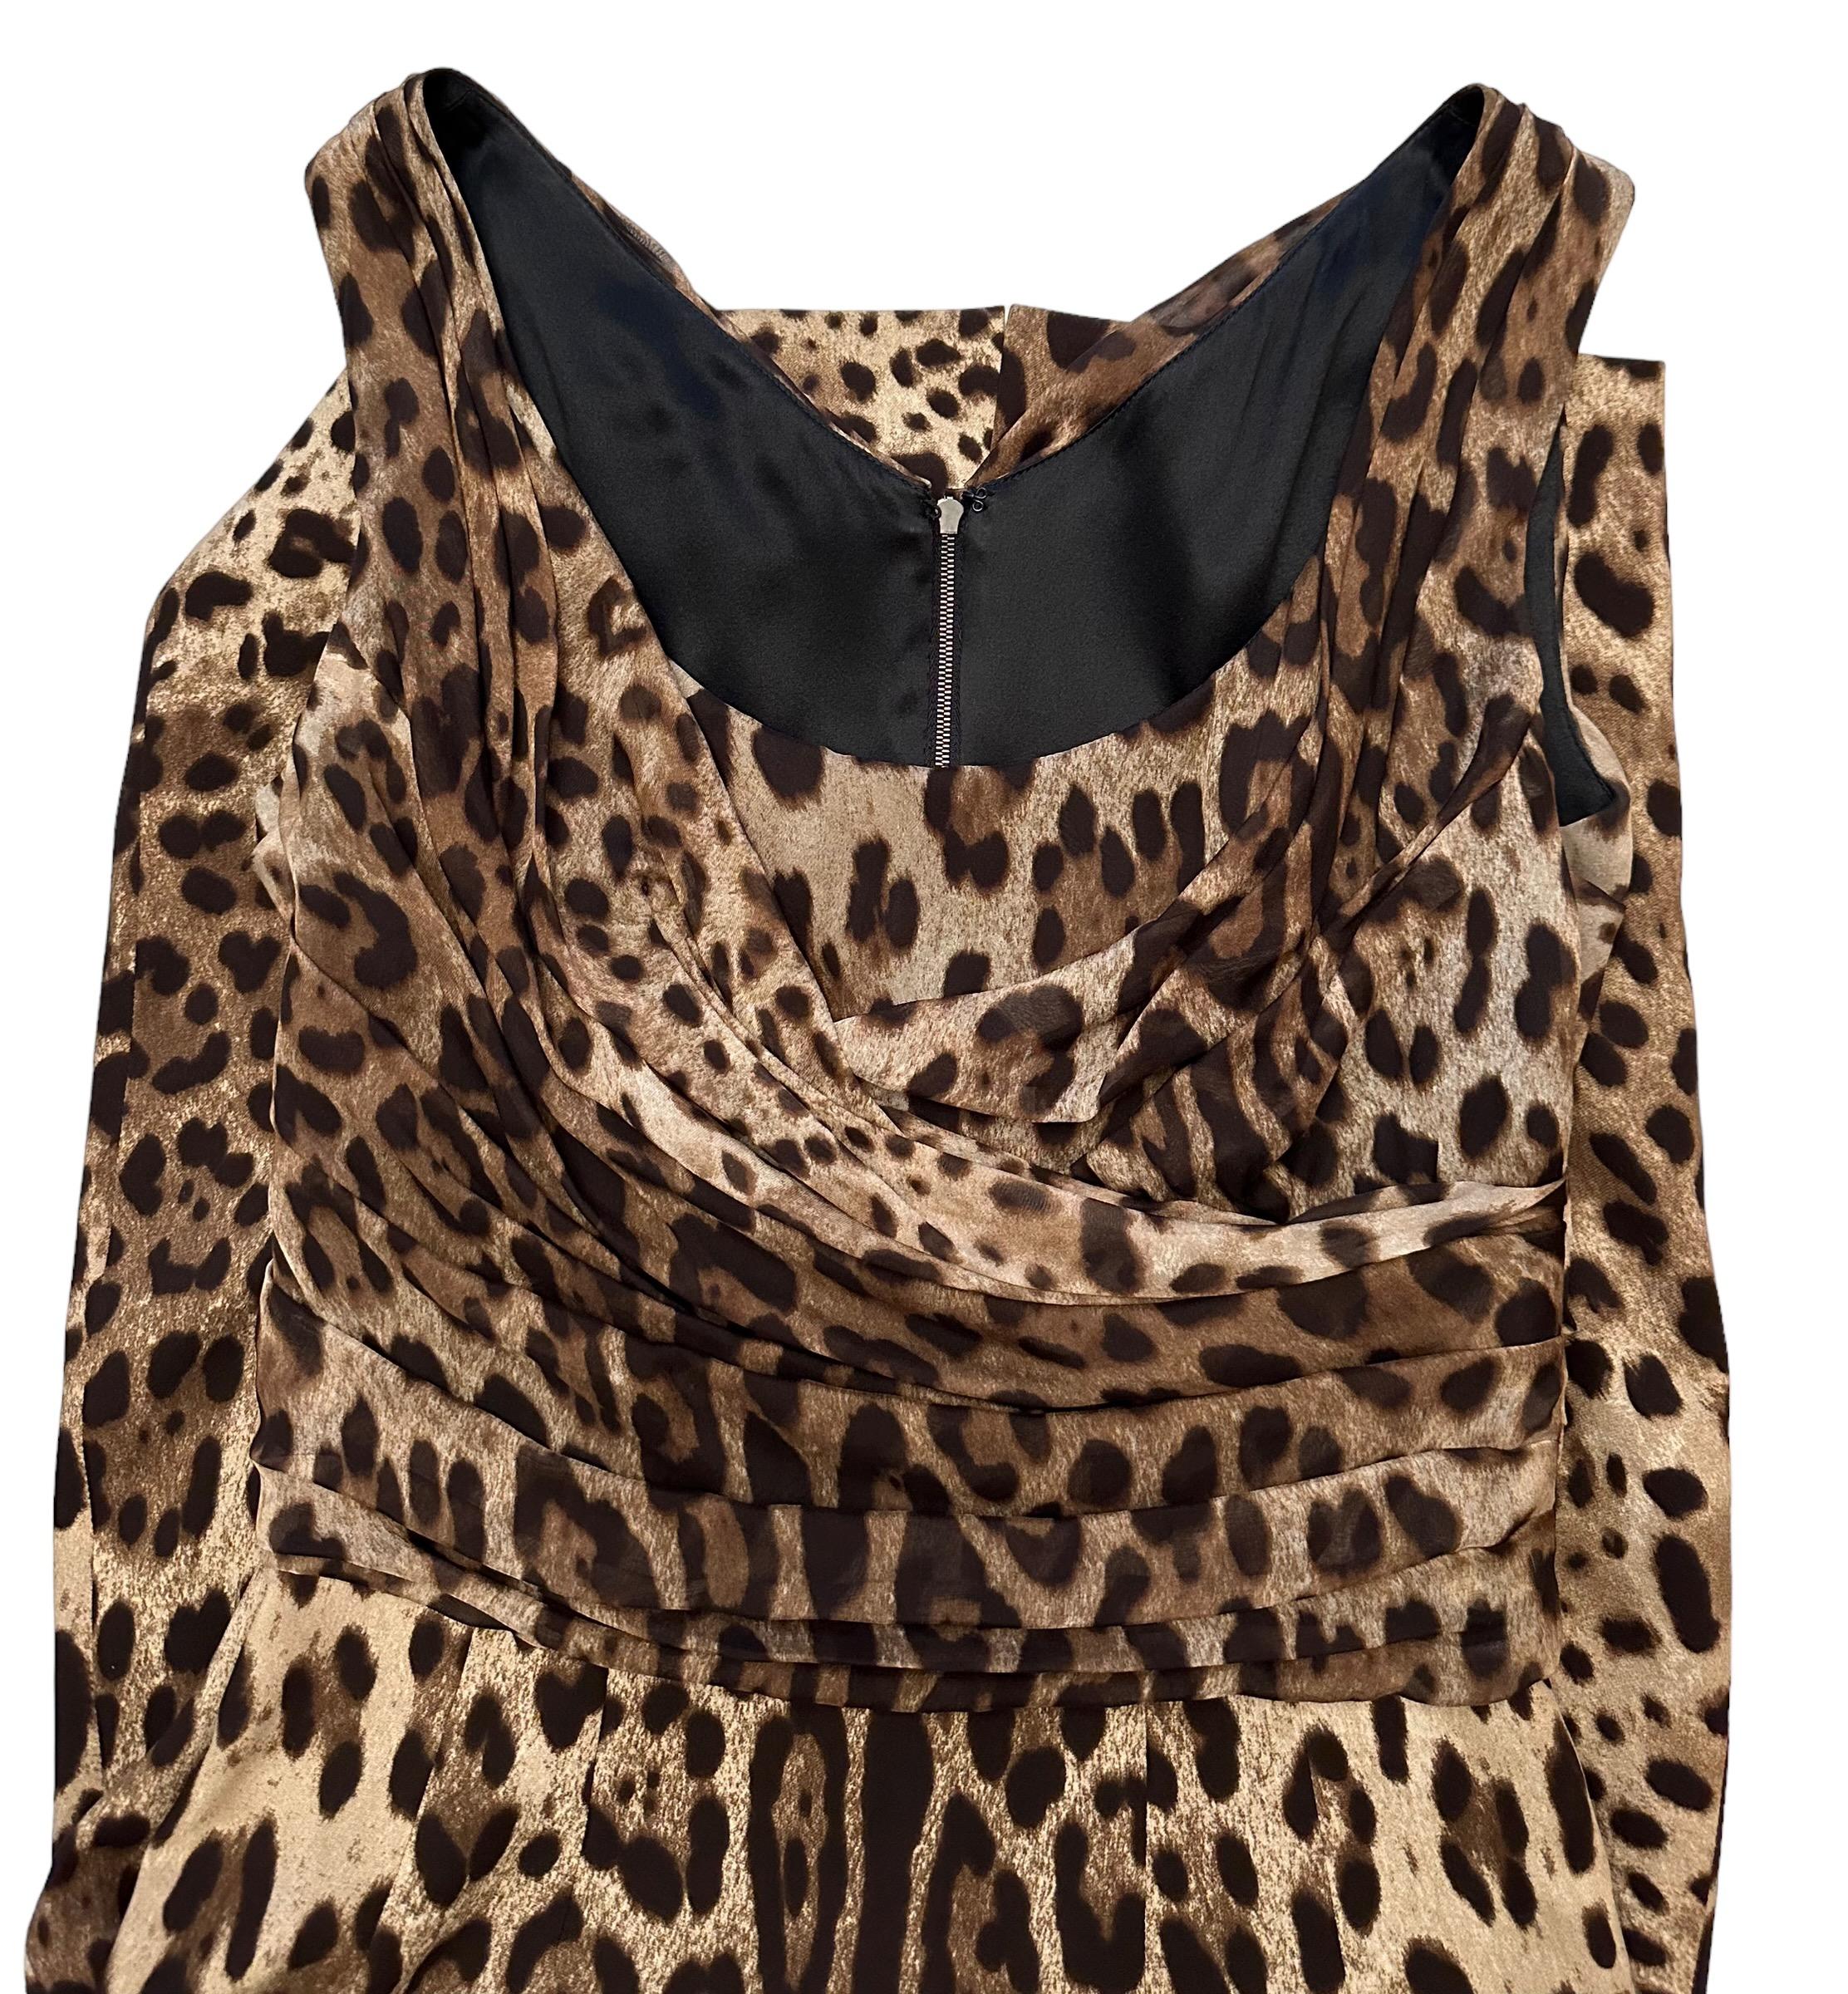 Dolce & Gabbana Animal Print Silk Sleeveless Dress In Excellent Condition For Sale In Geneva, CH